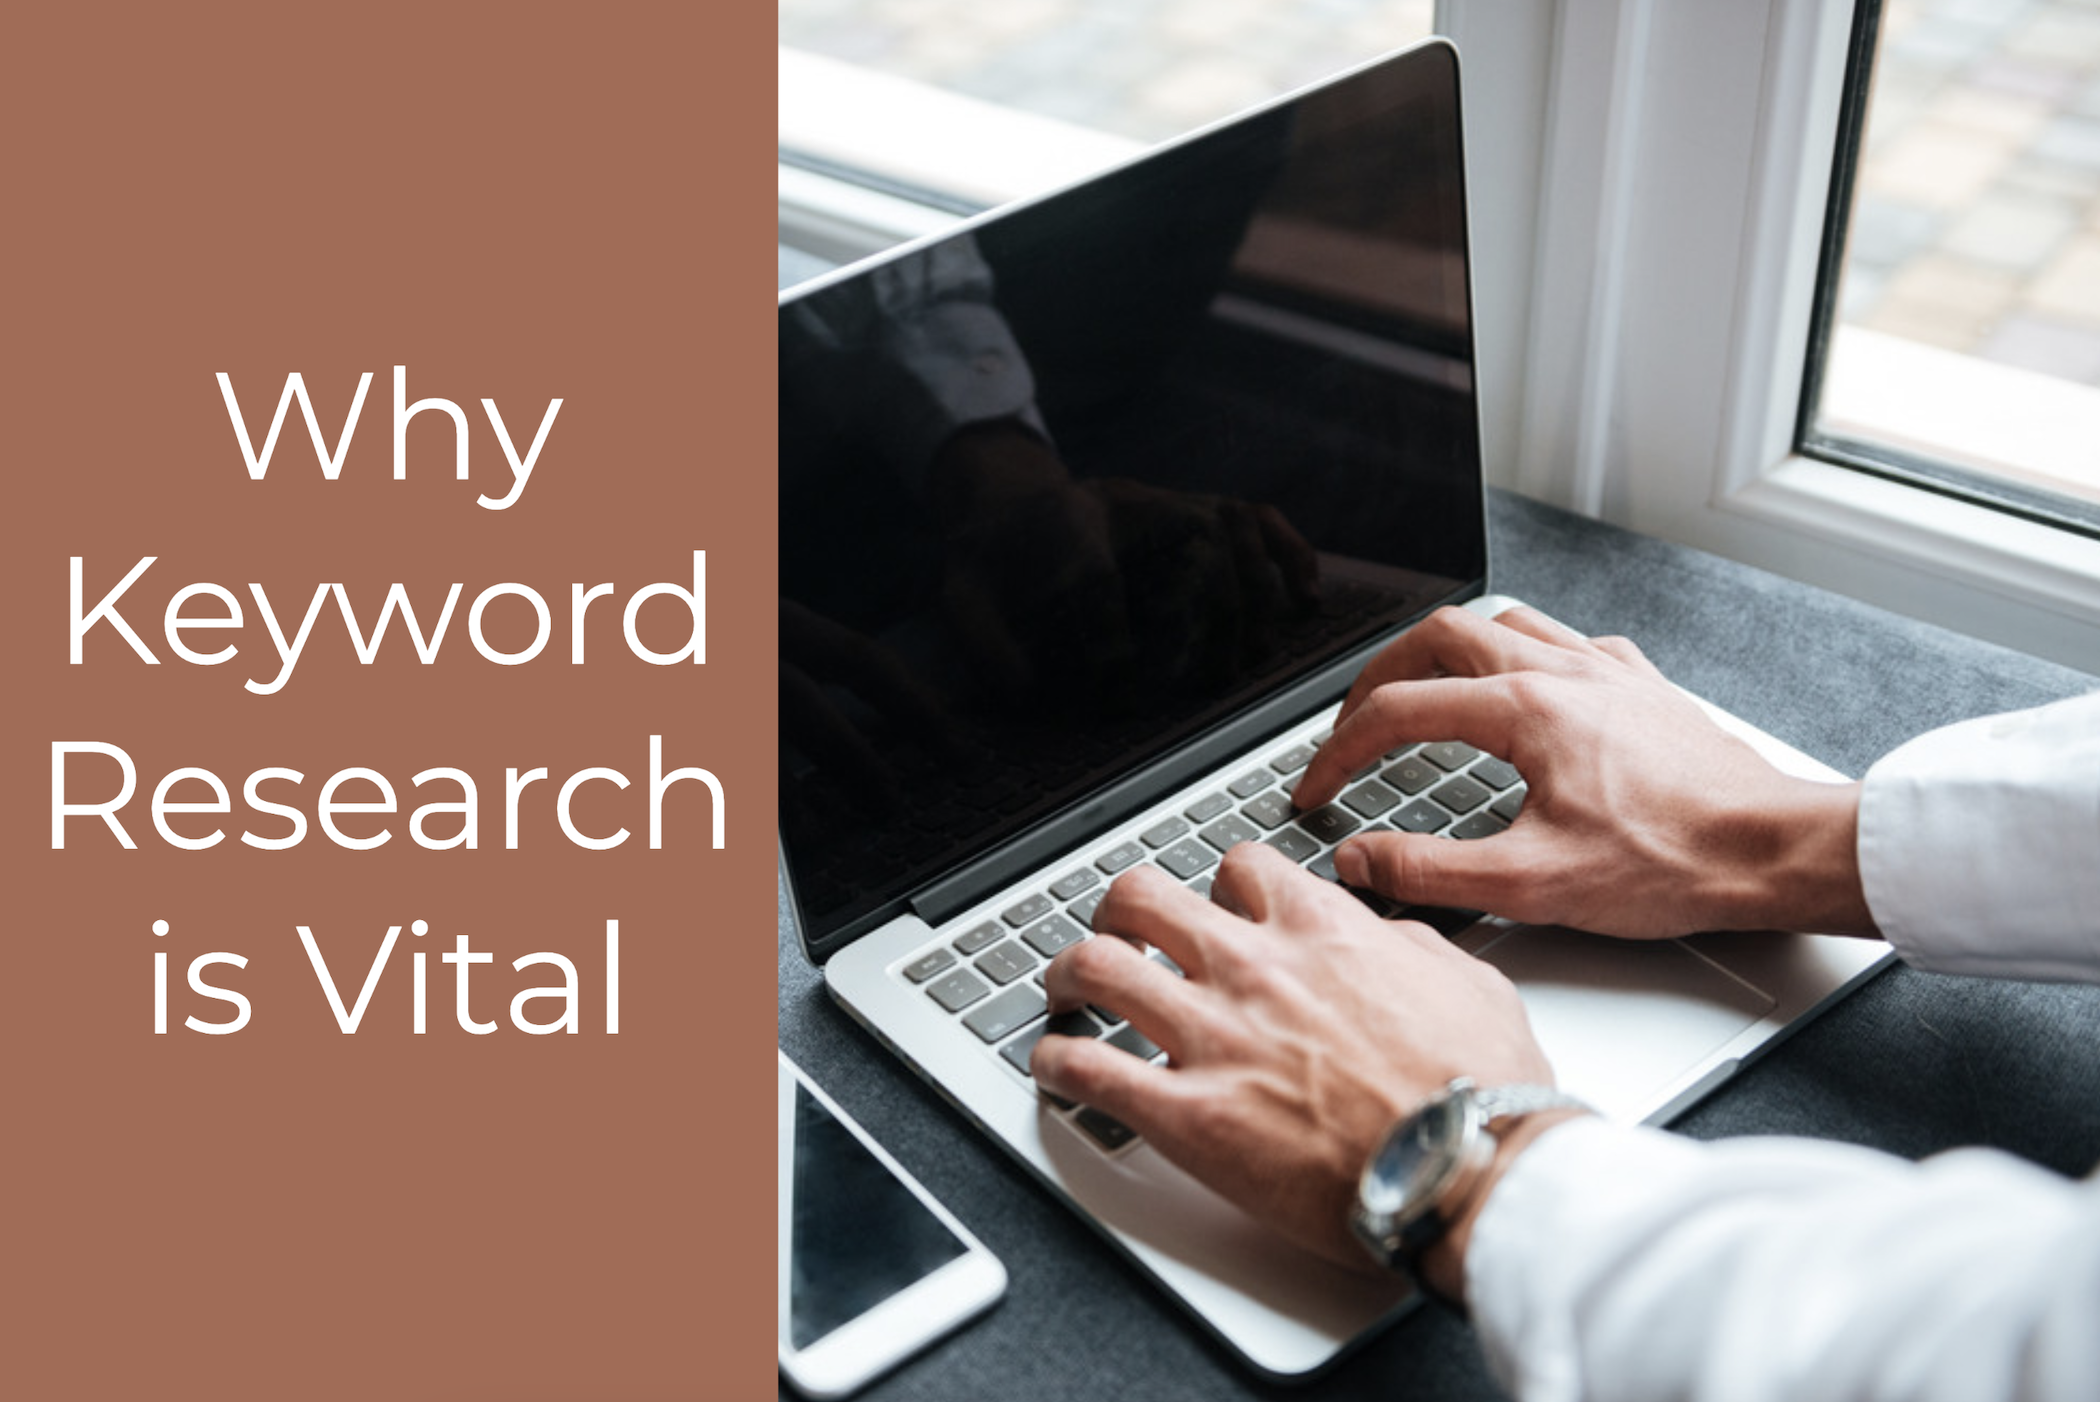 Why Keyword Research is Vital